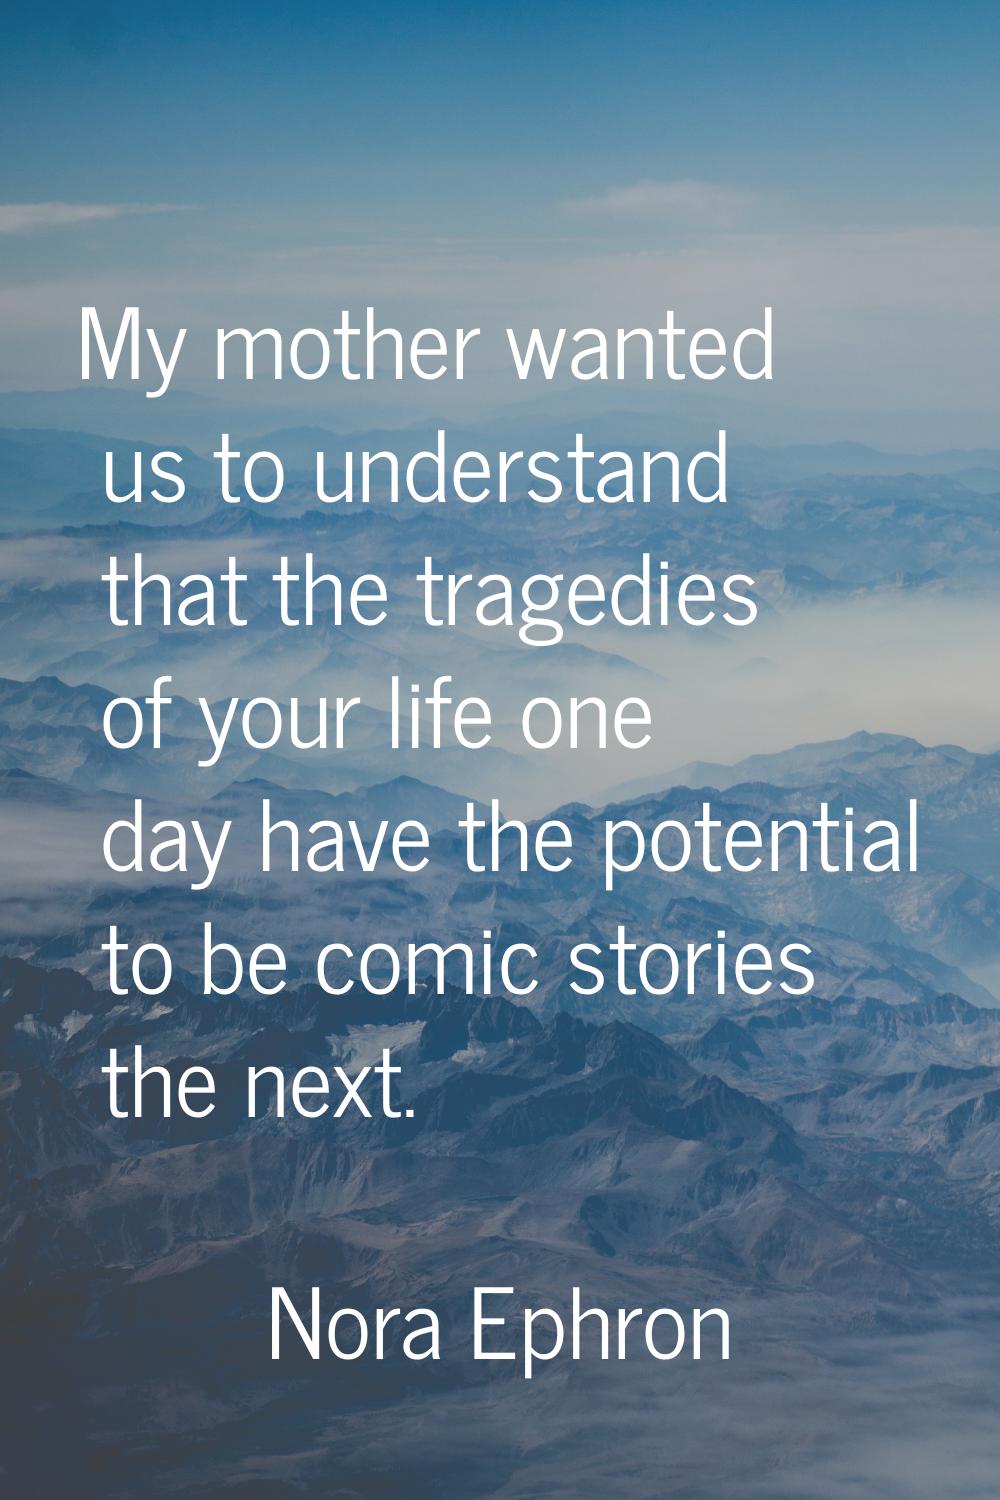 My mother wanted us to understand that the tragedies of your life one day have the potential to be 